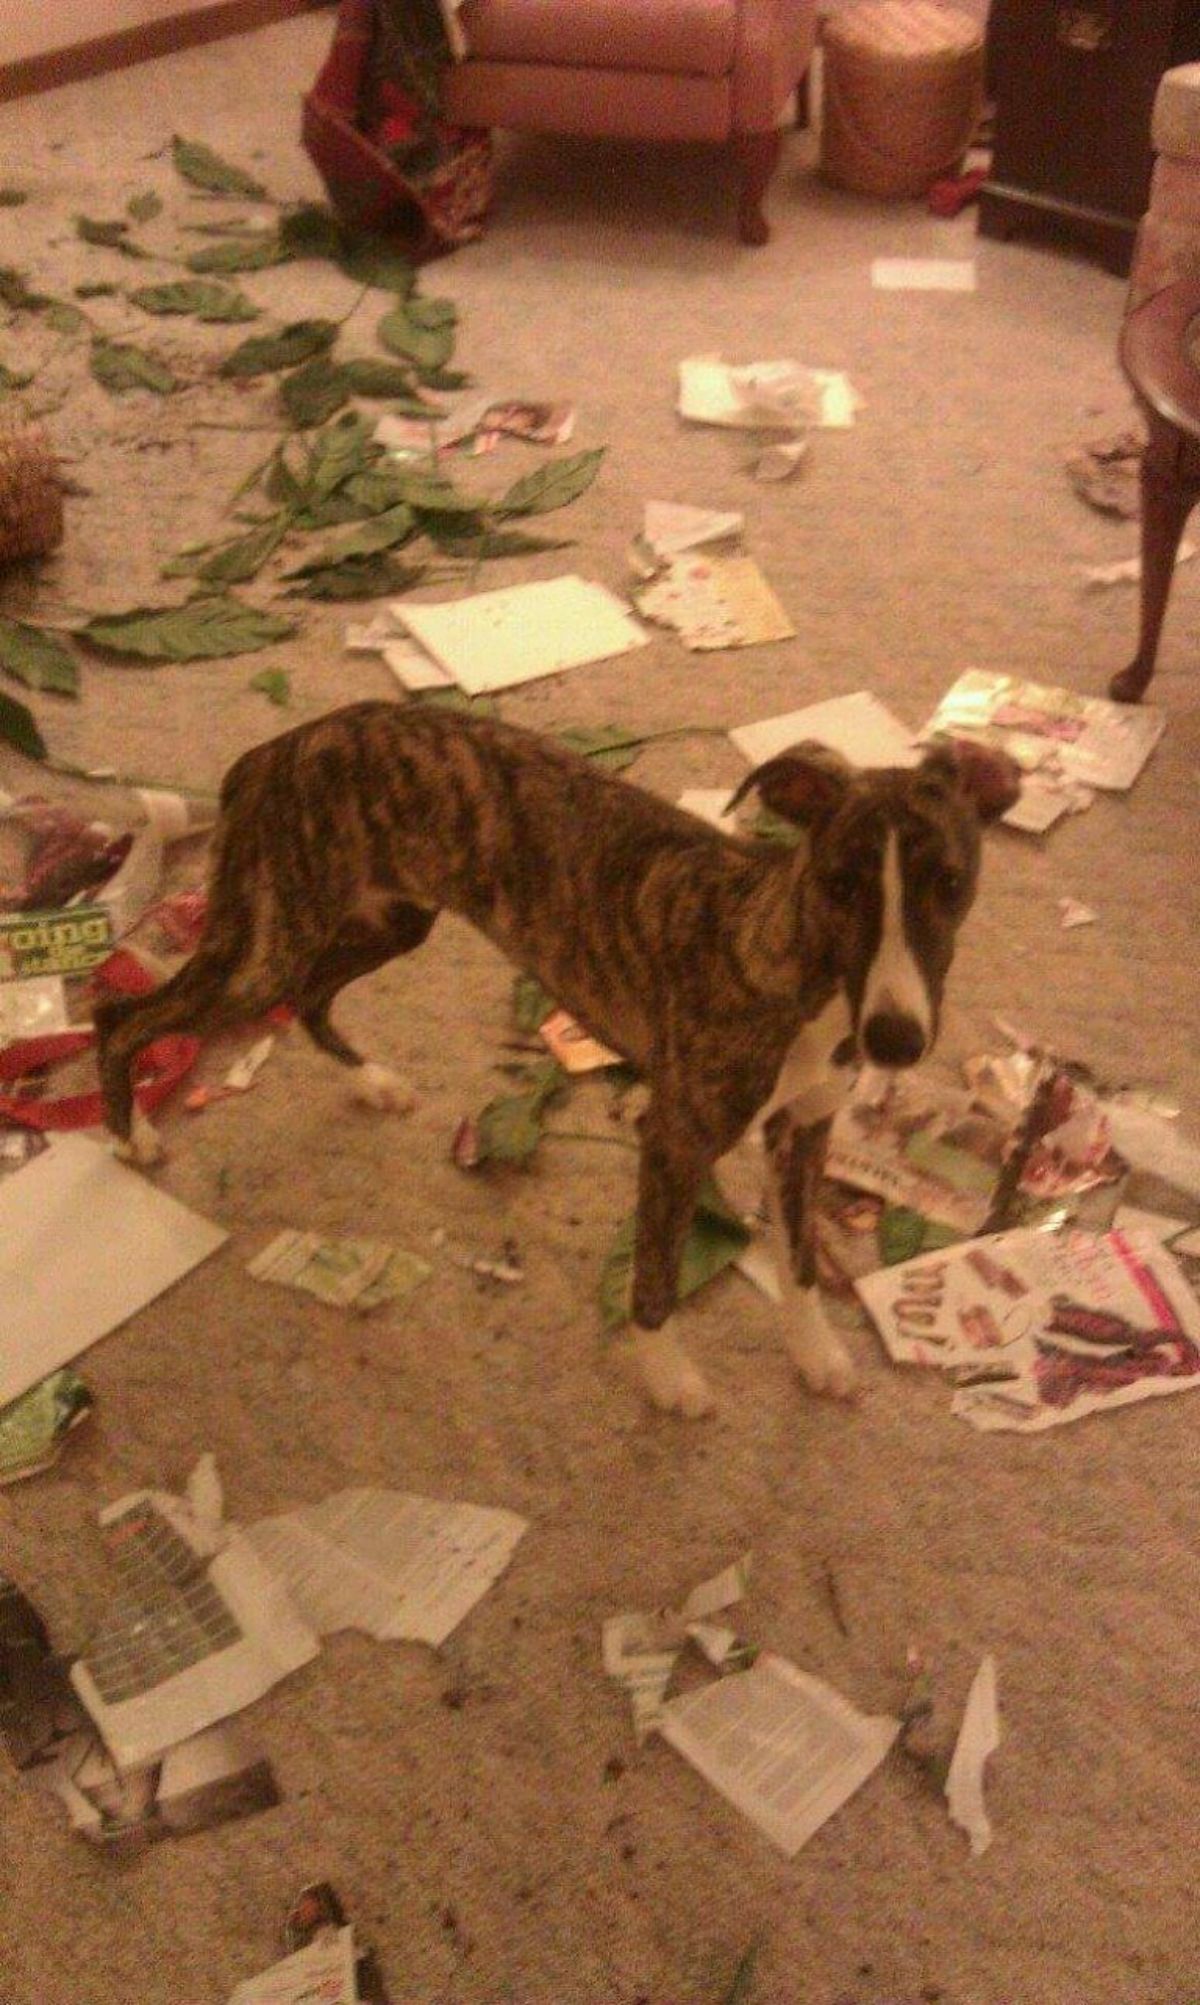 brown black and white dog standing in the middle of ripped up magazines and destroyed plants